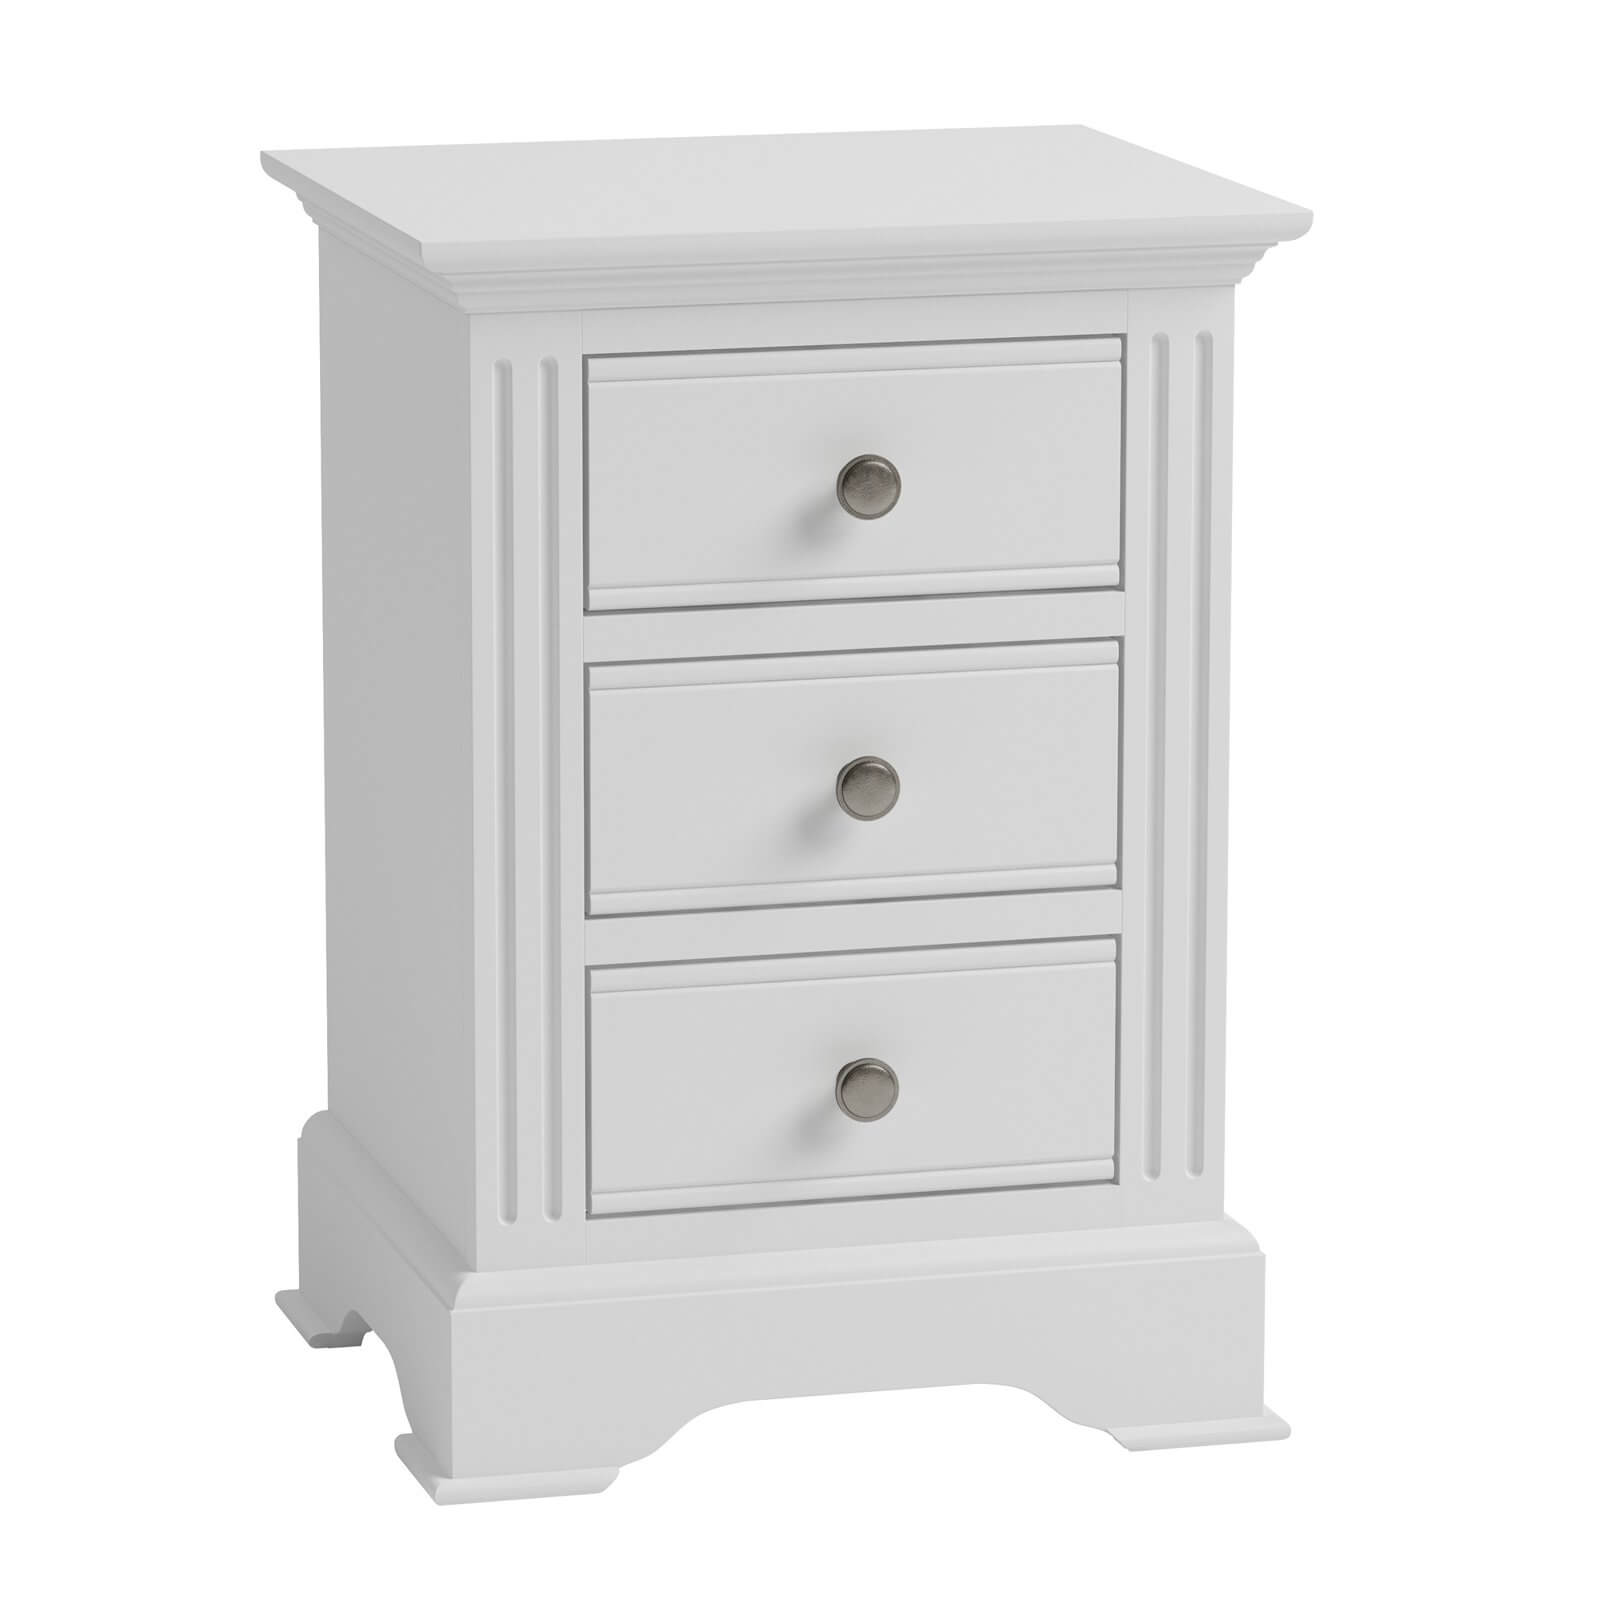 Camborne Large Bedside Table - White